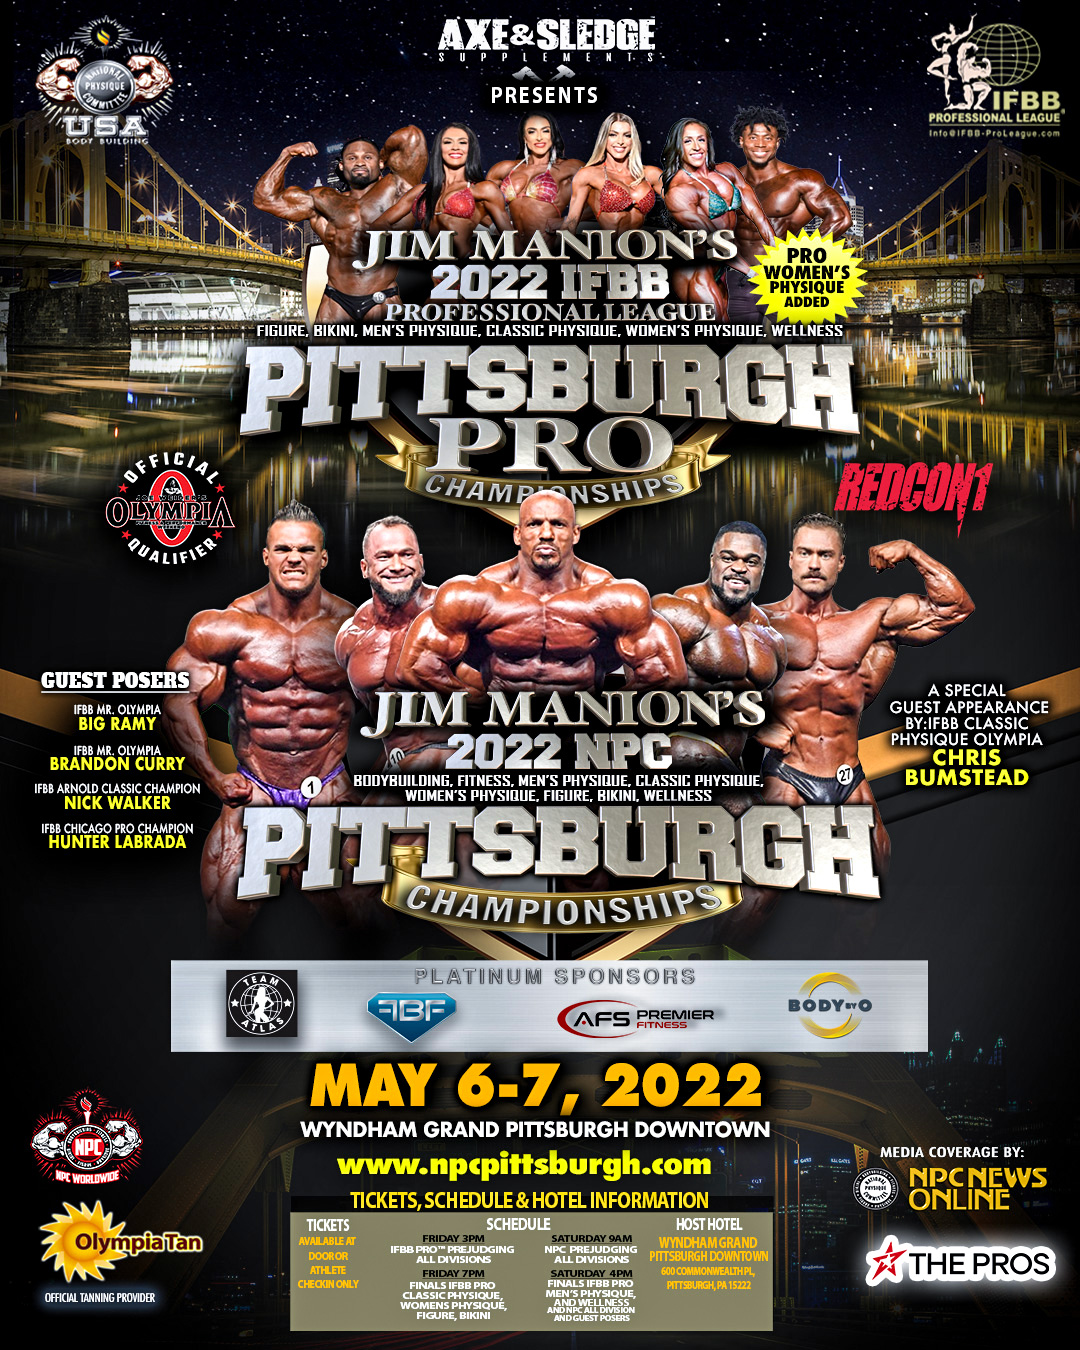 IT’S HERE! THE OFFICIAL JIM MANION’S 2022 IFBB PITTSBURGH PRO & 2022